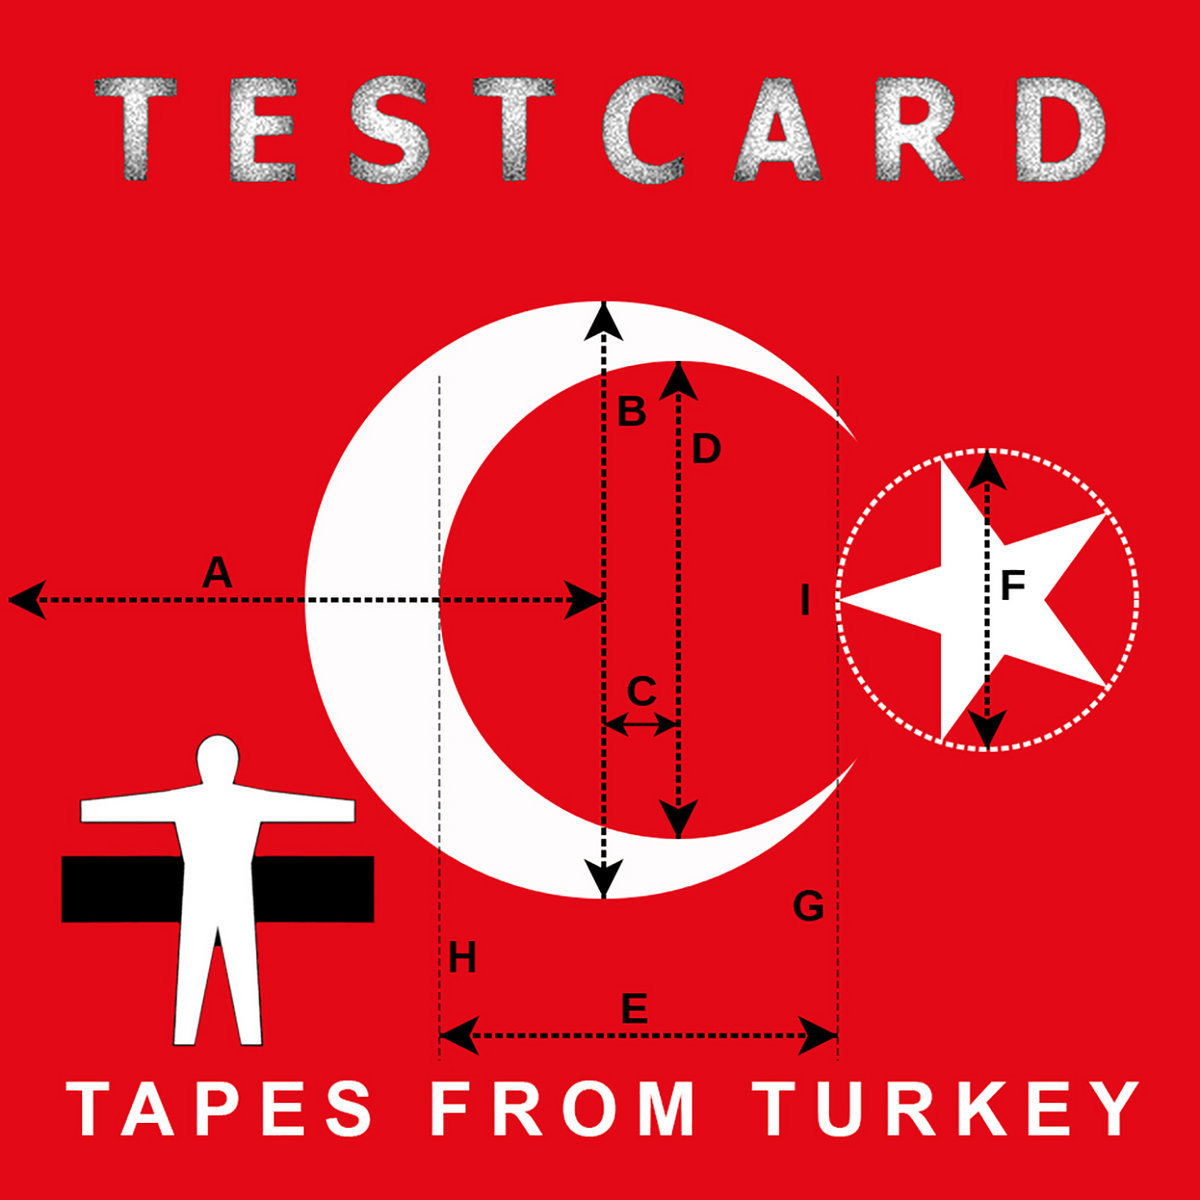 Tapes from Turkey